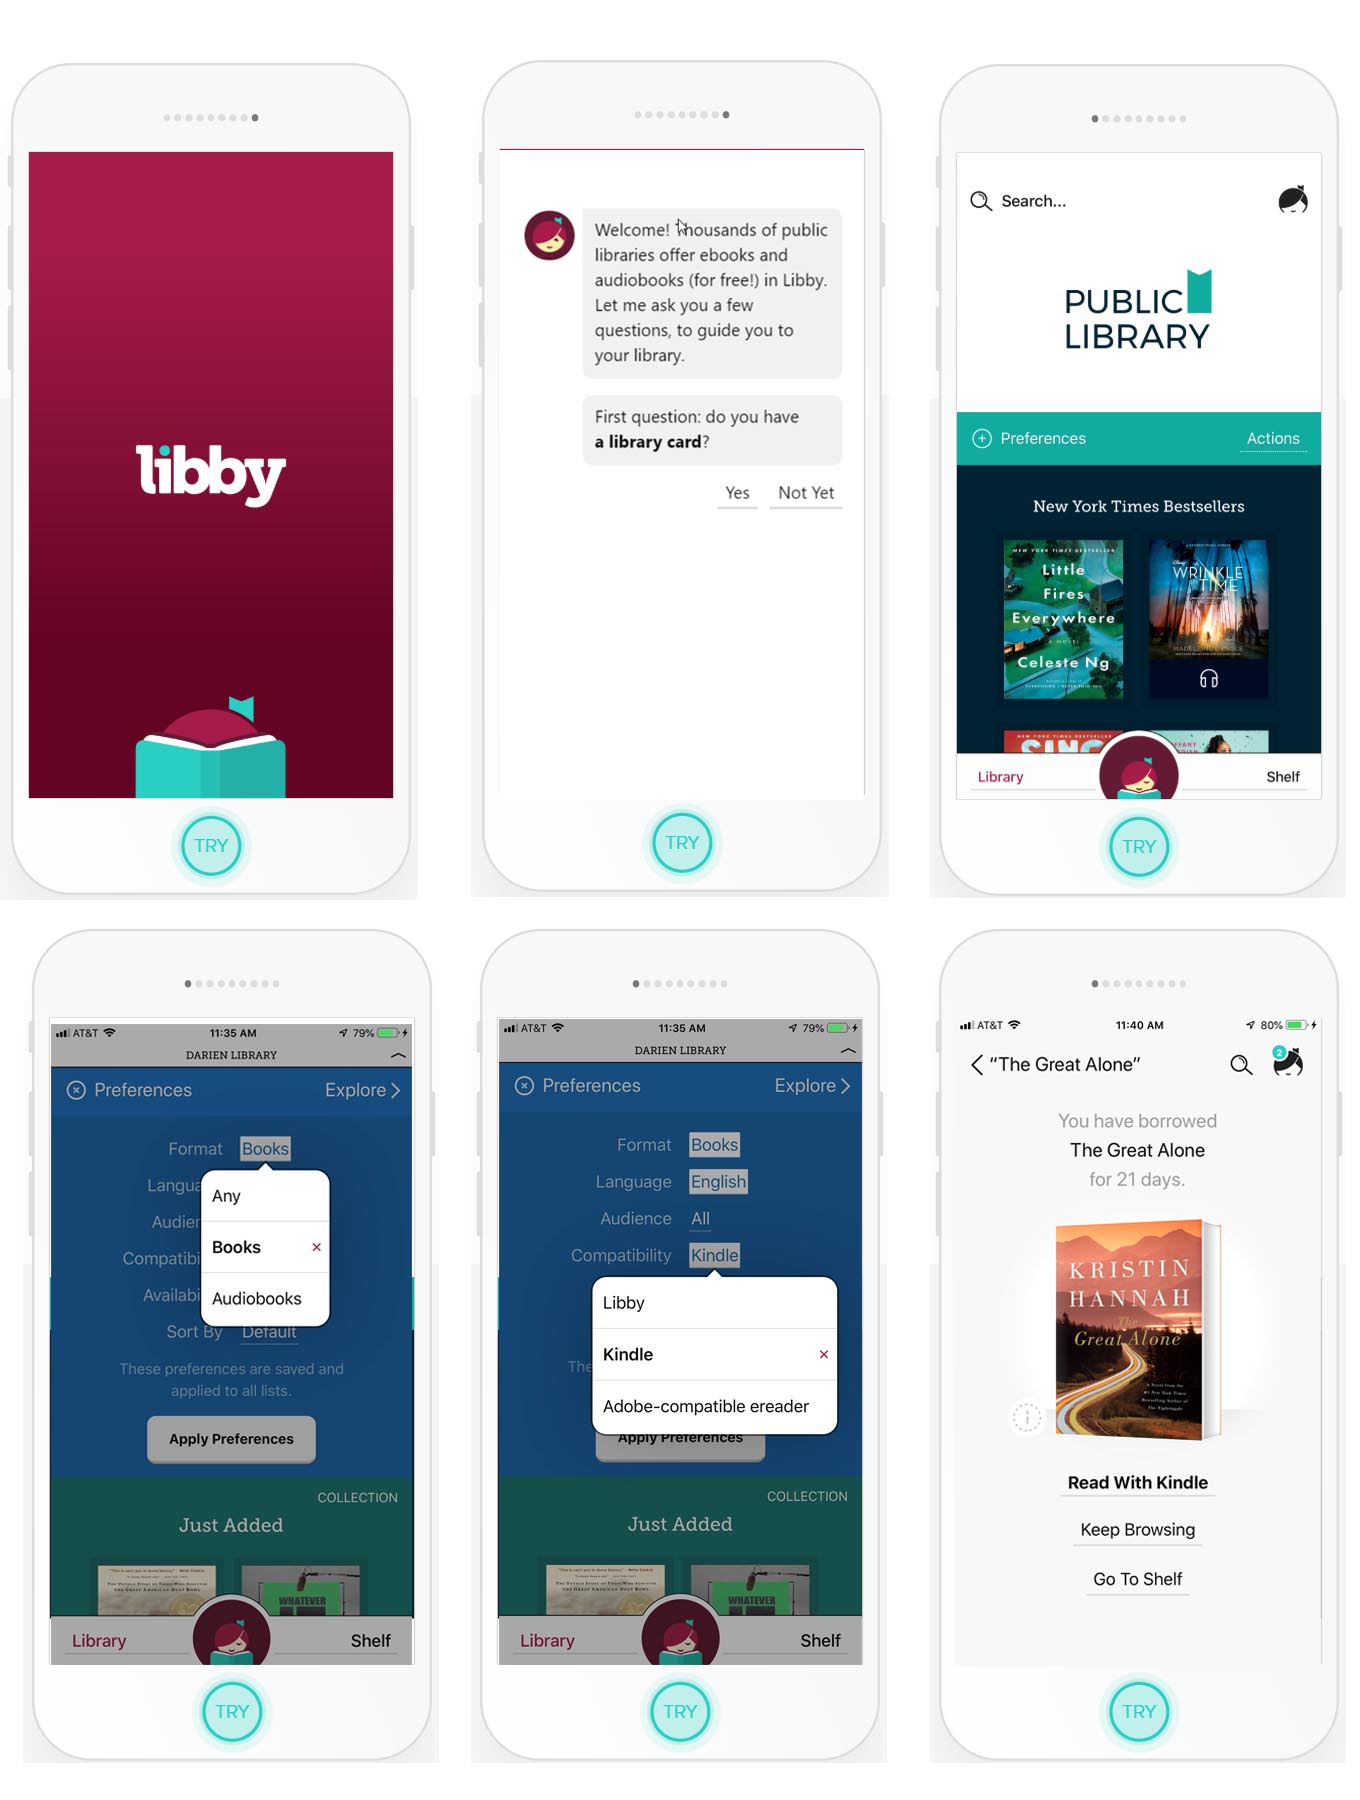 Have You Met Libby? Get Library Books Right to Your Device and Kindle! Nothing is easier to read on your phone then with the Libby APP.